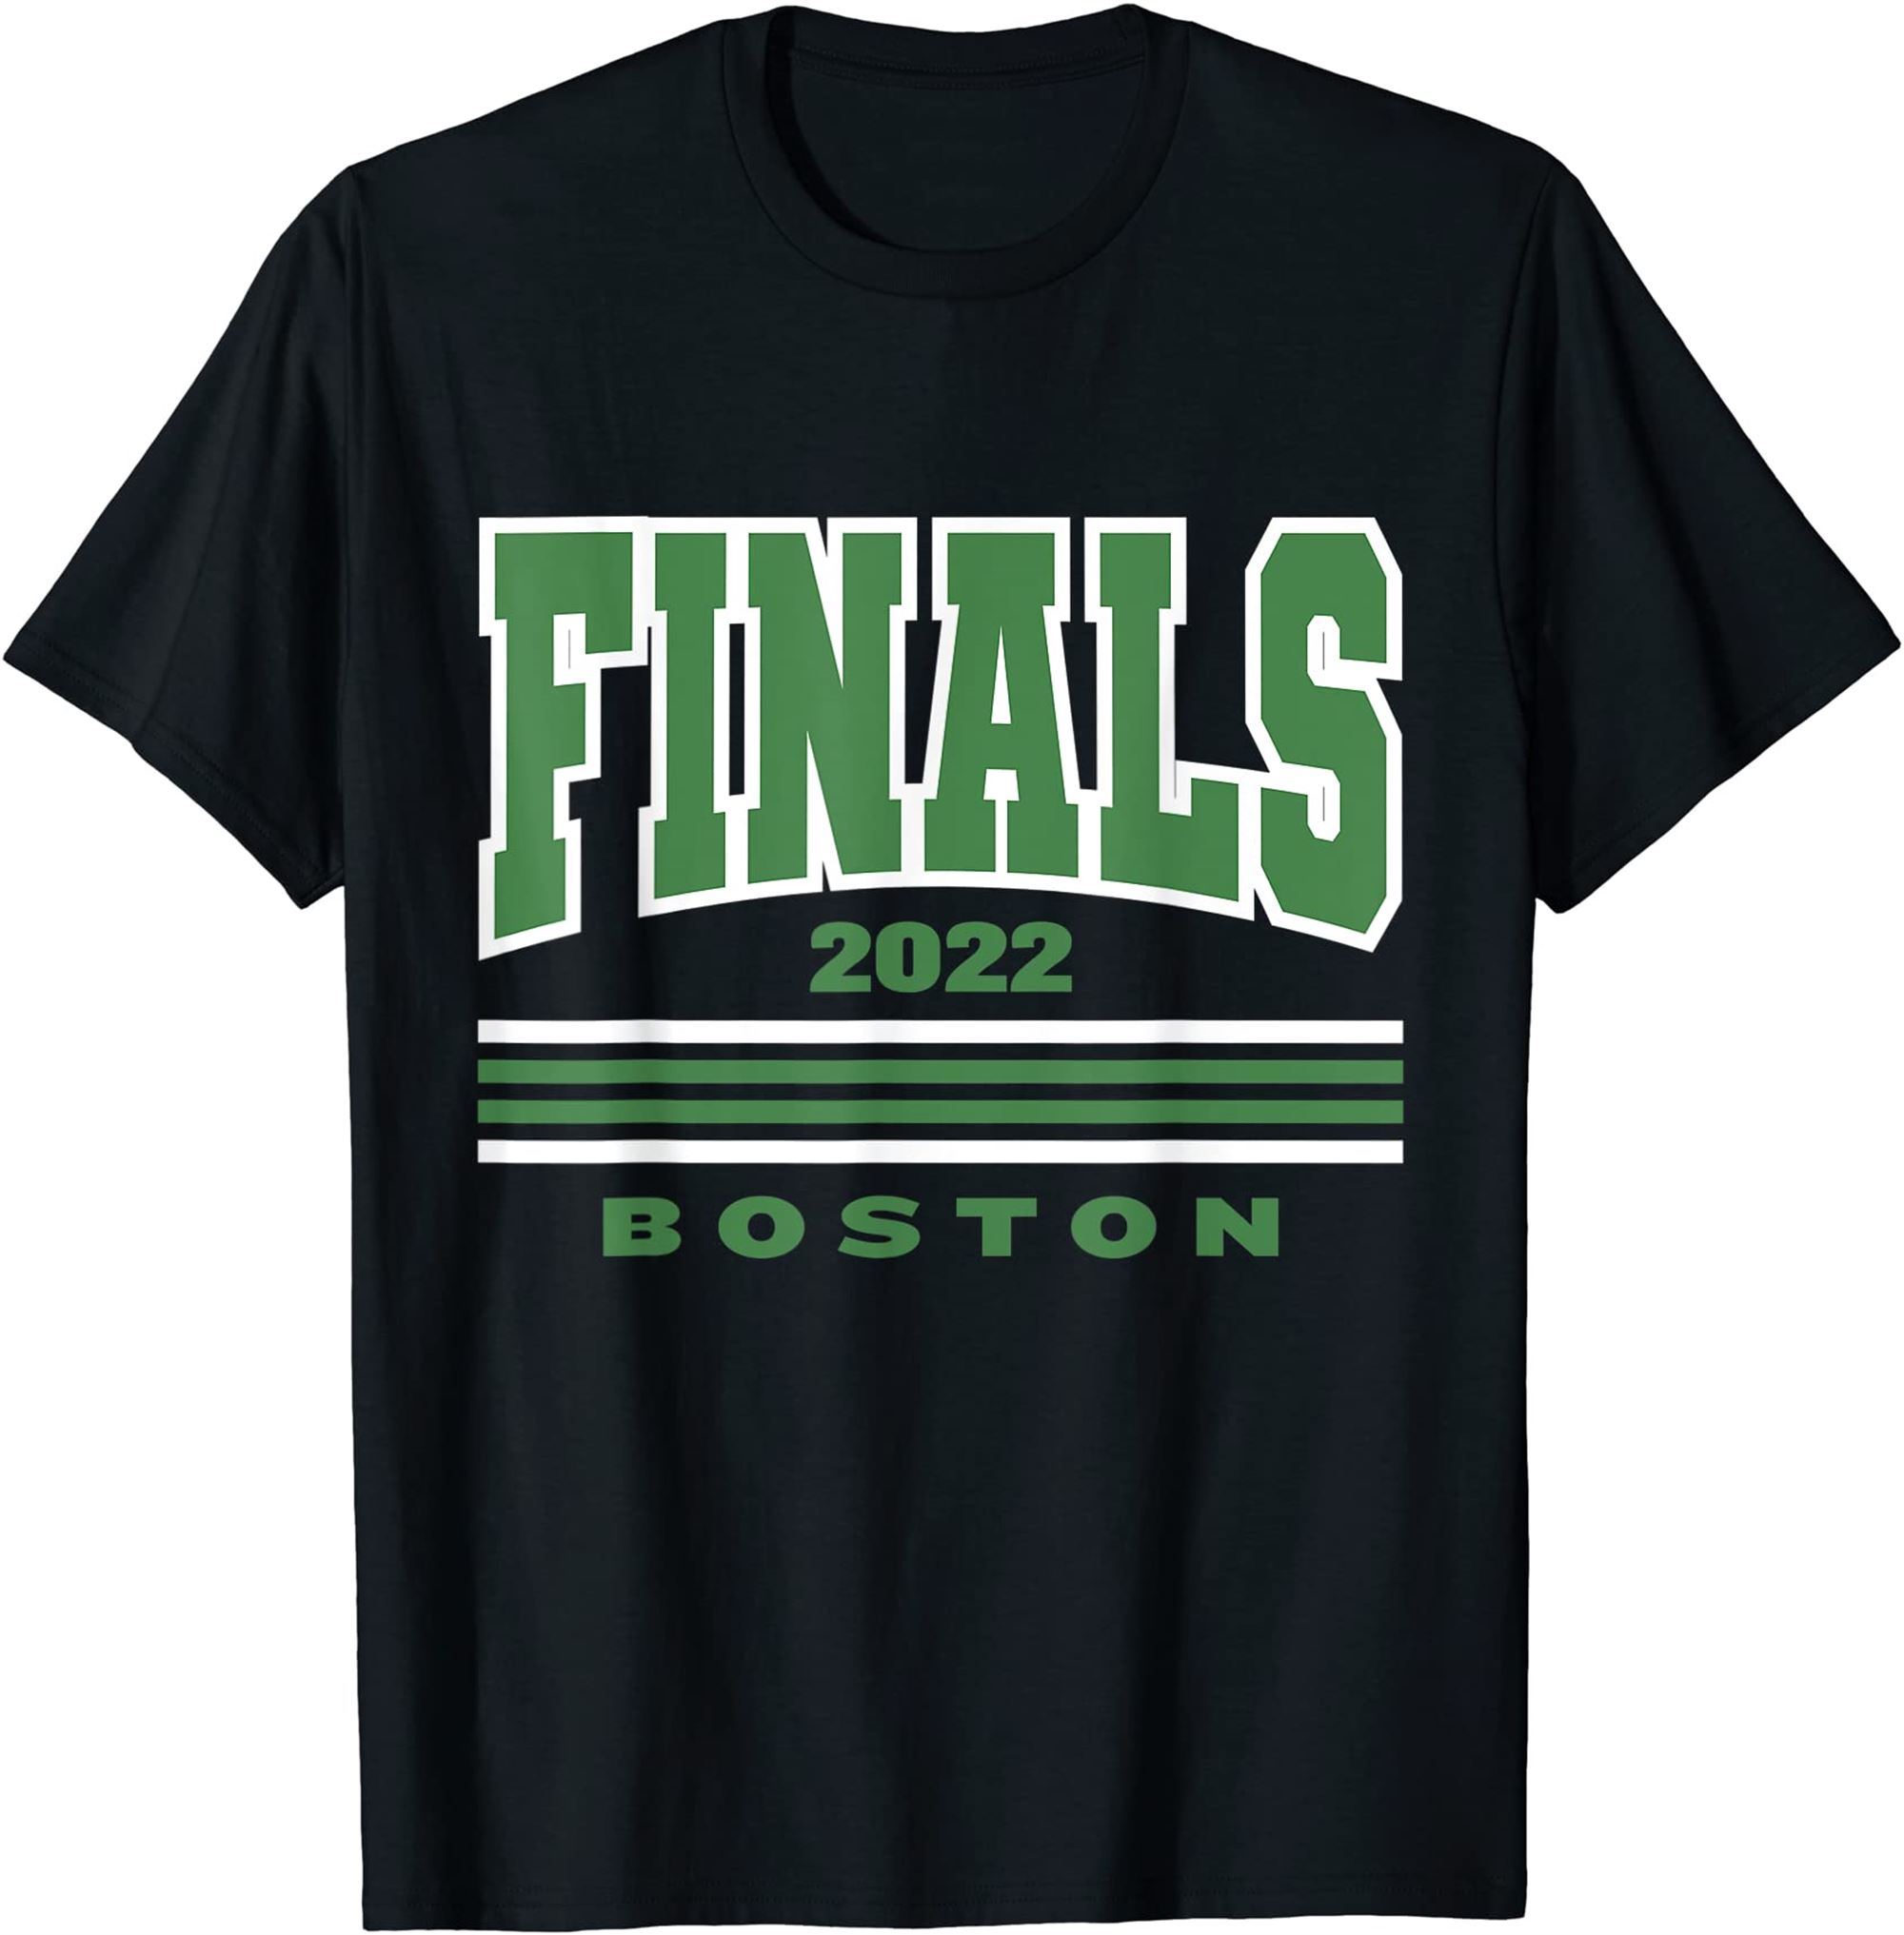 Boston Finals 2022 Basketball T-shirt Full Size Up To 5xl